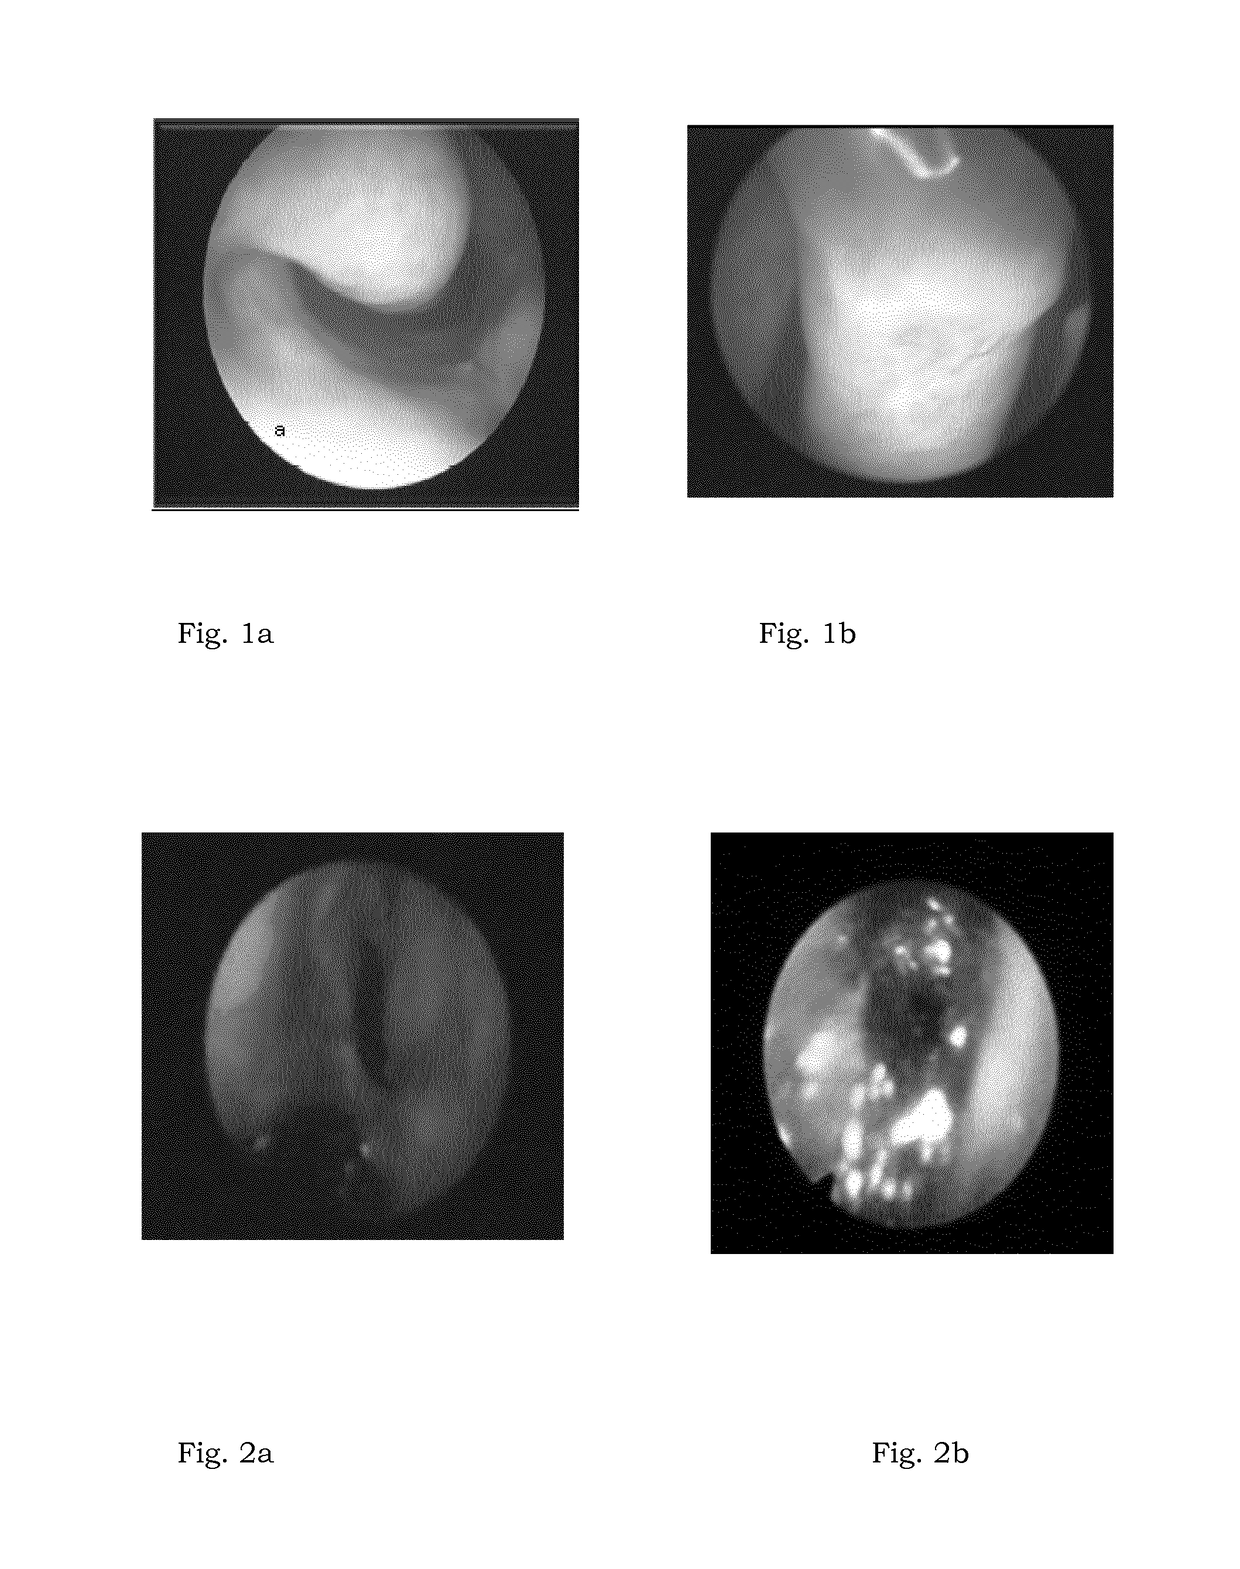 Pharmaceutical composition for use in increasing the trophism of nasal mucosa